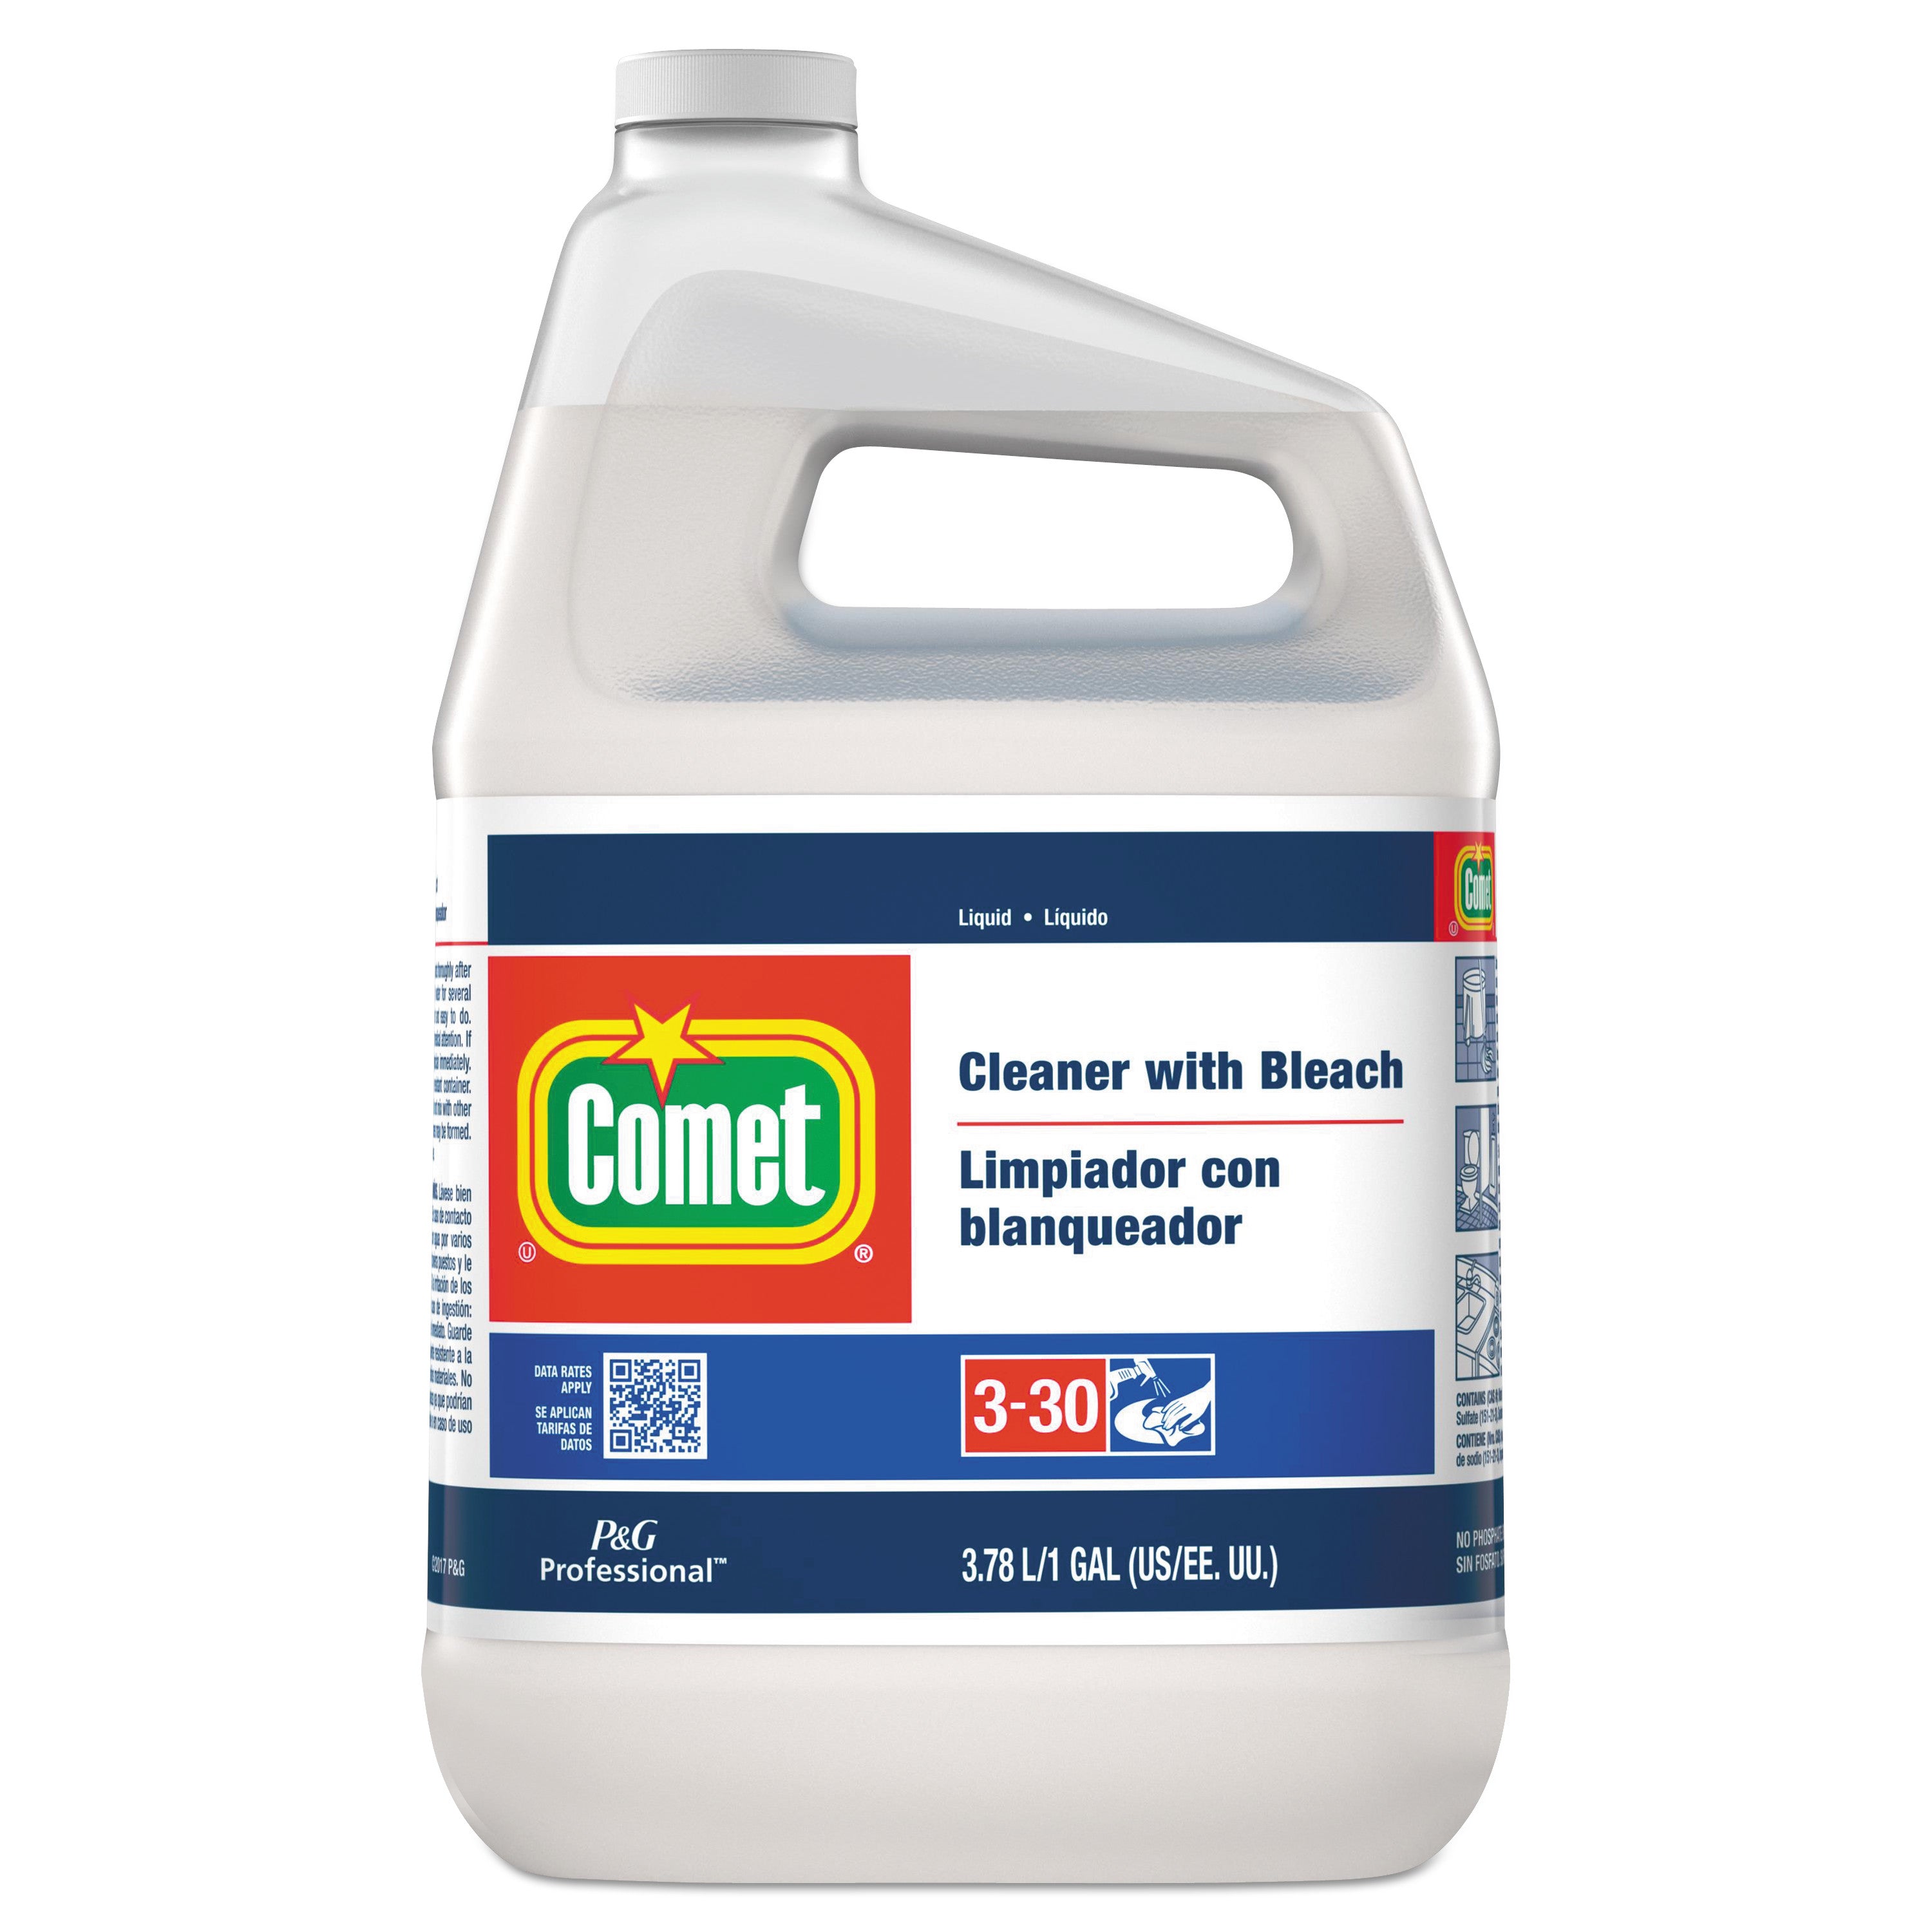 Cleaner with Bleach, Liquid, One Gallon Bottle - 